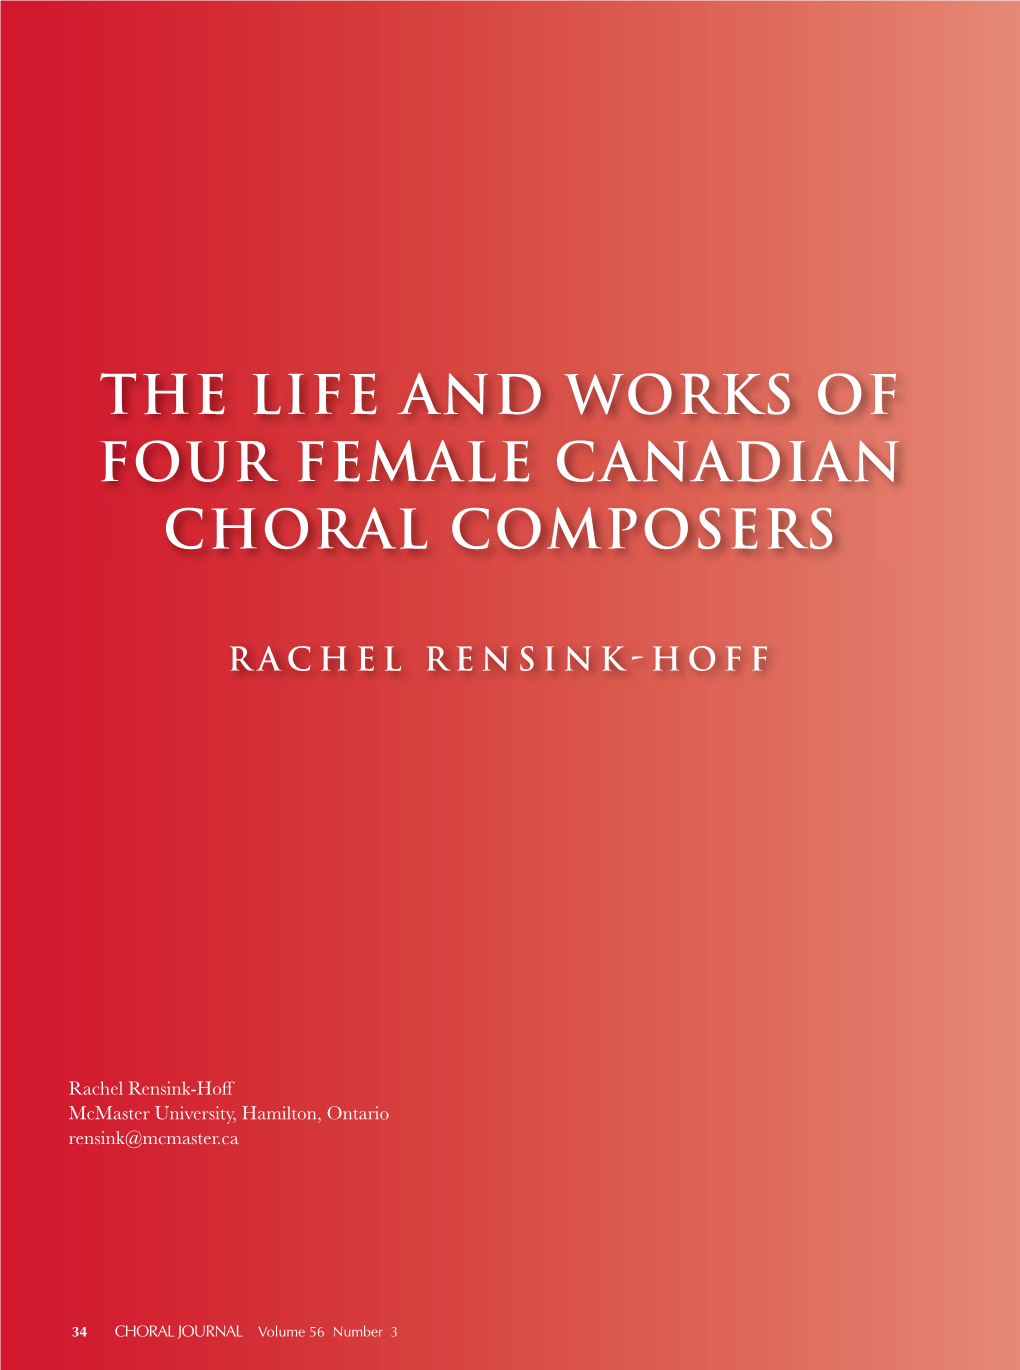 The Life and Works of Four Female Canadian Choral Composers